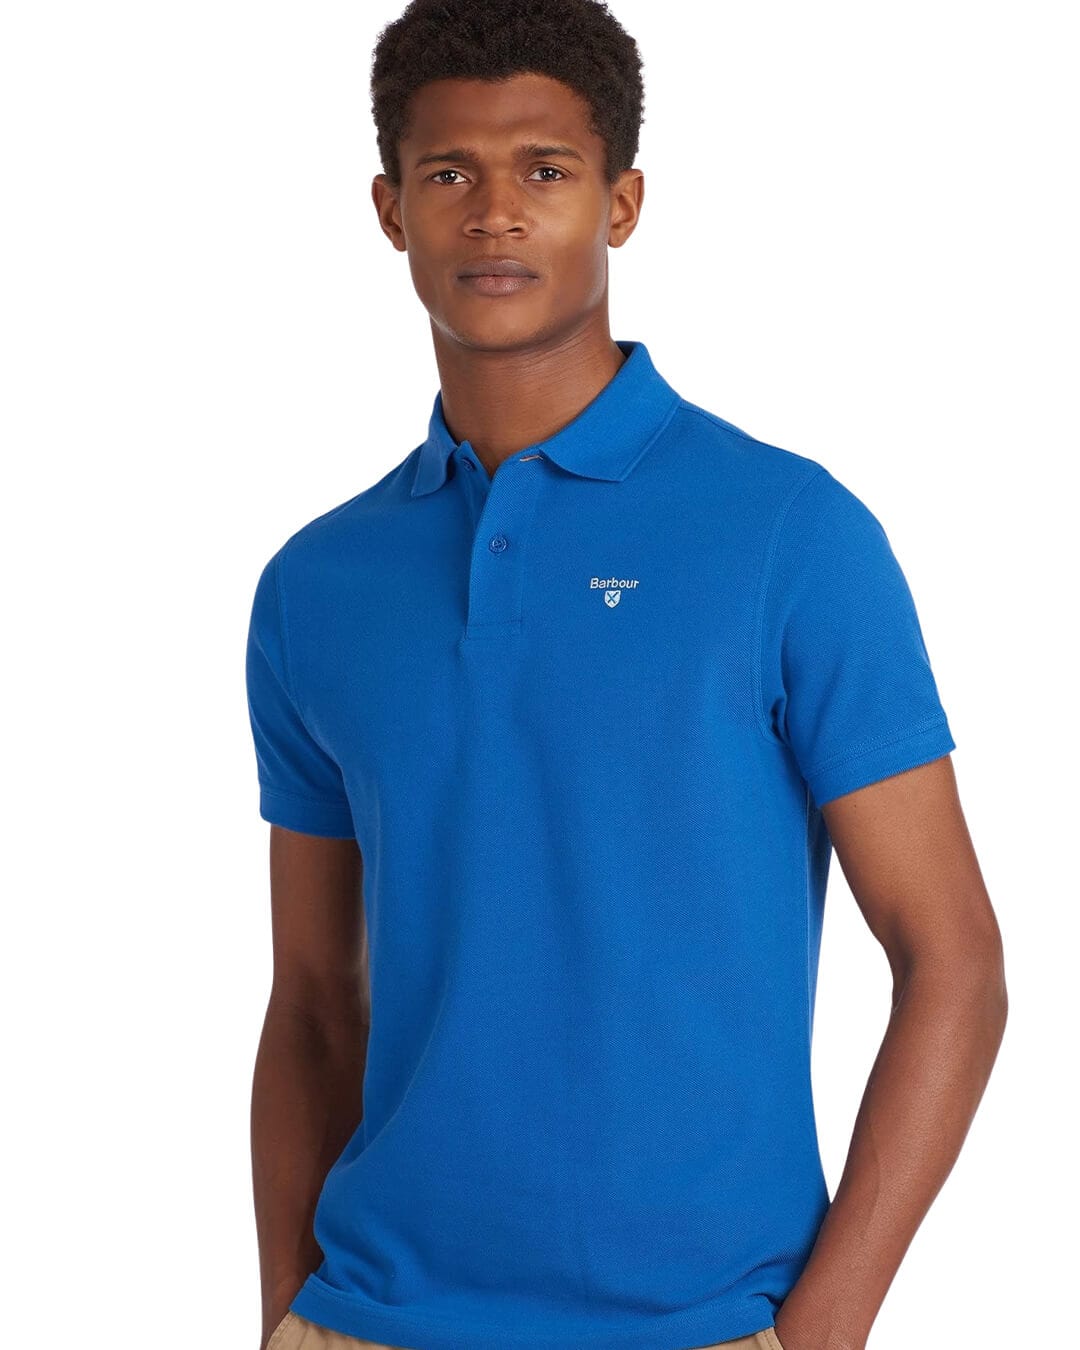 Barbour Polo Shirts Barbour Blue Sports Polo Shirt